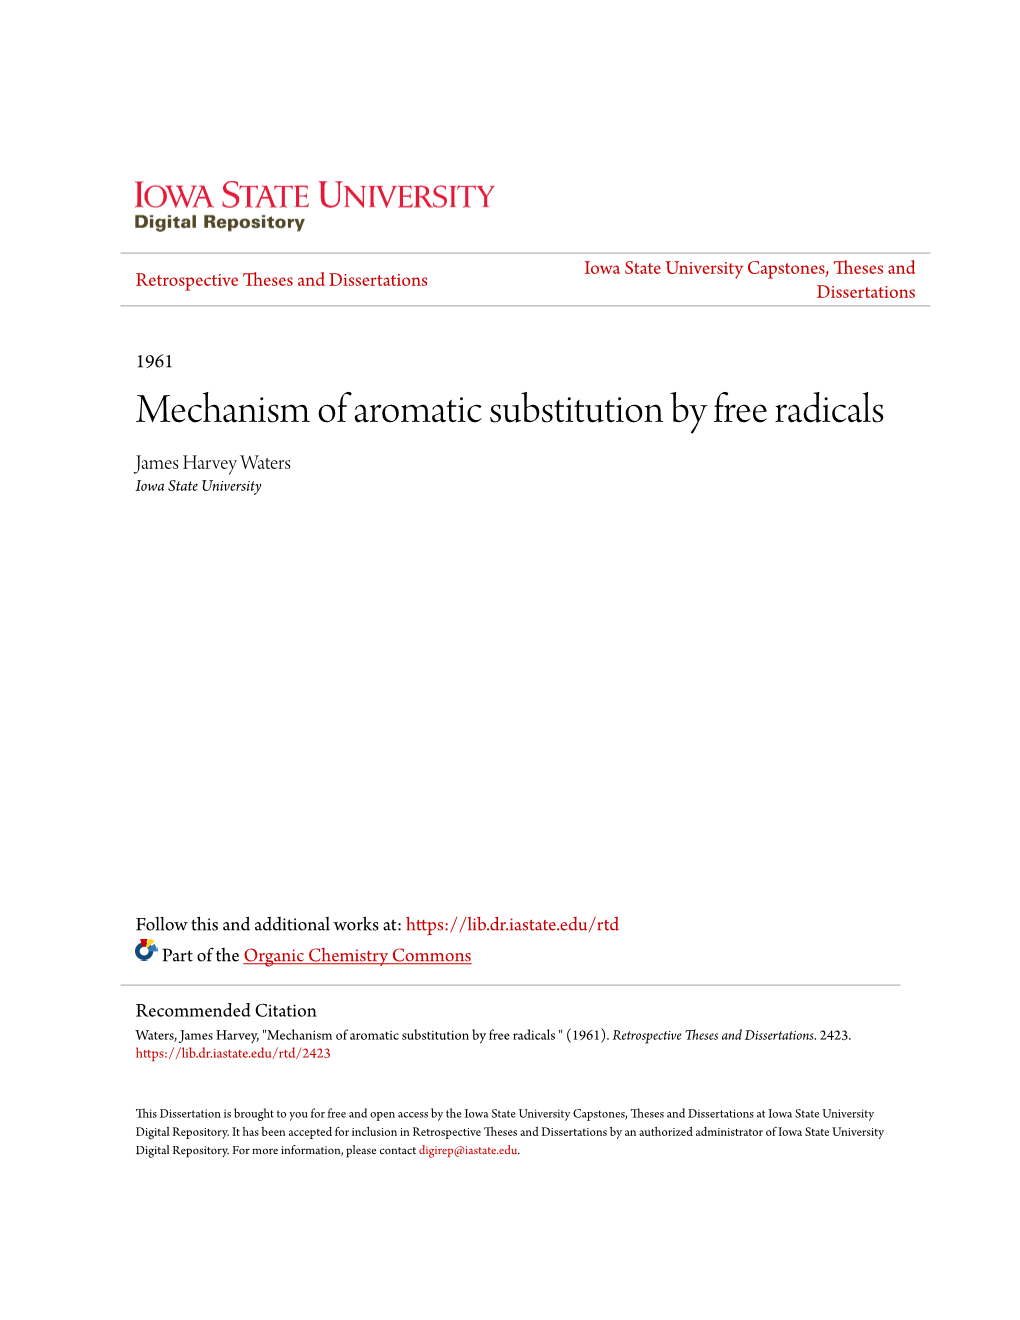 Mechanism of Aromatic Substitution by Free Radicals James Harvey Waters Iowa State University